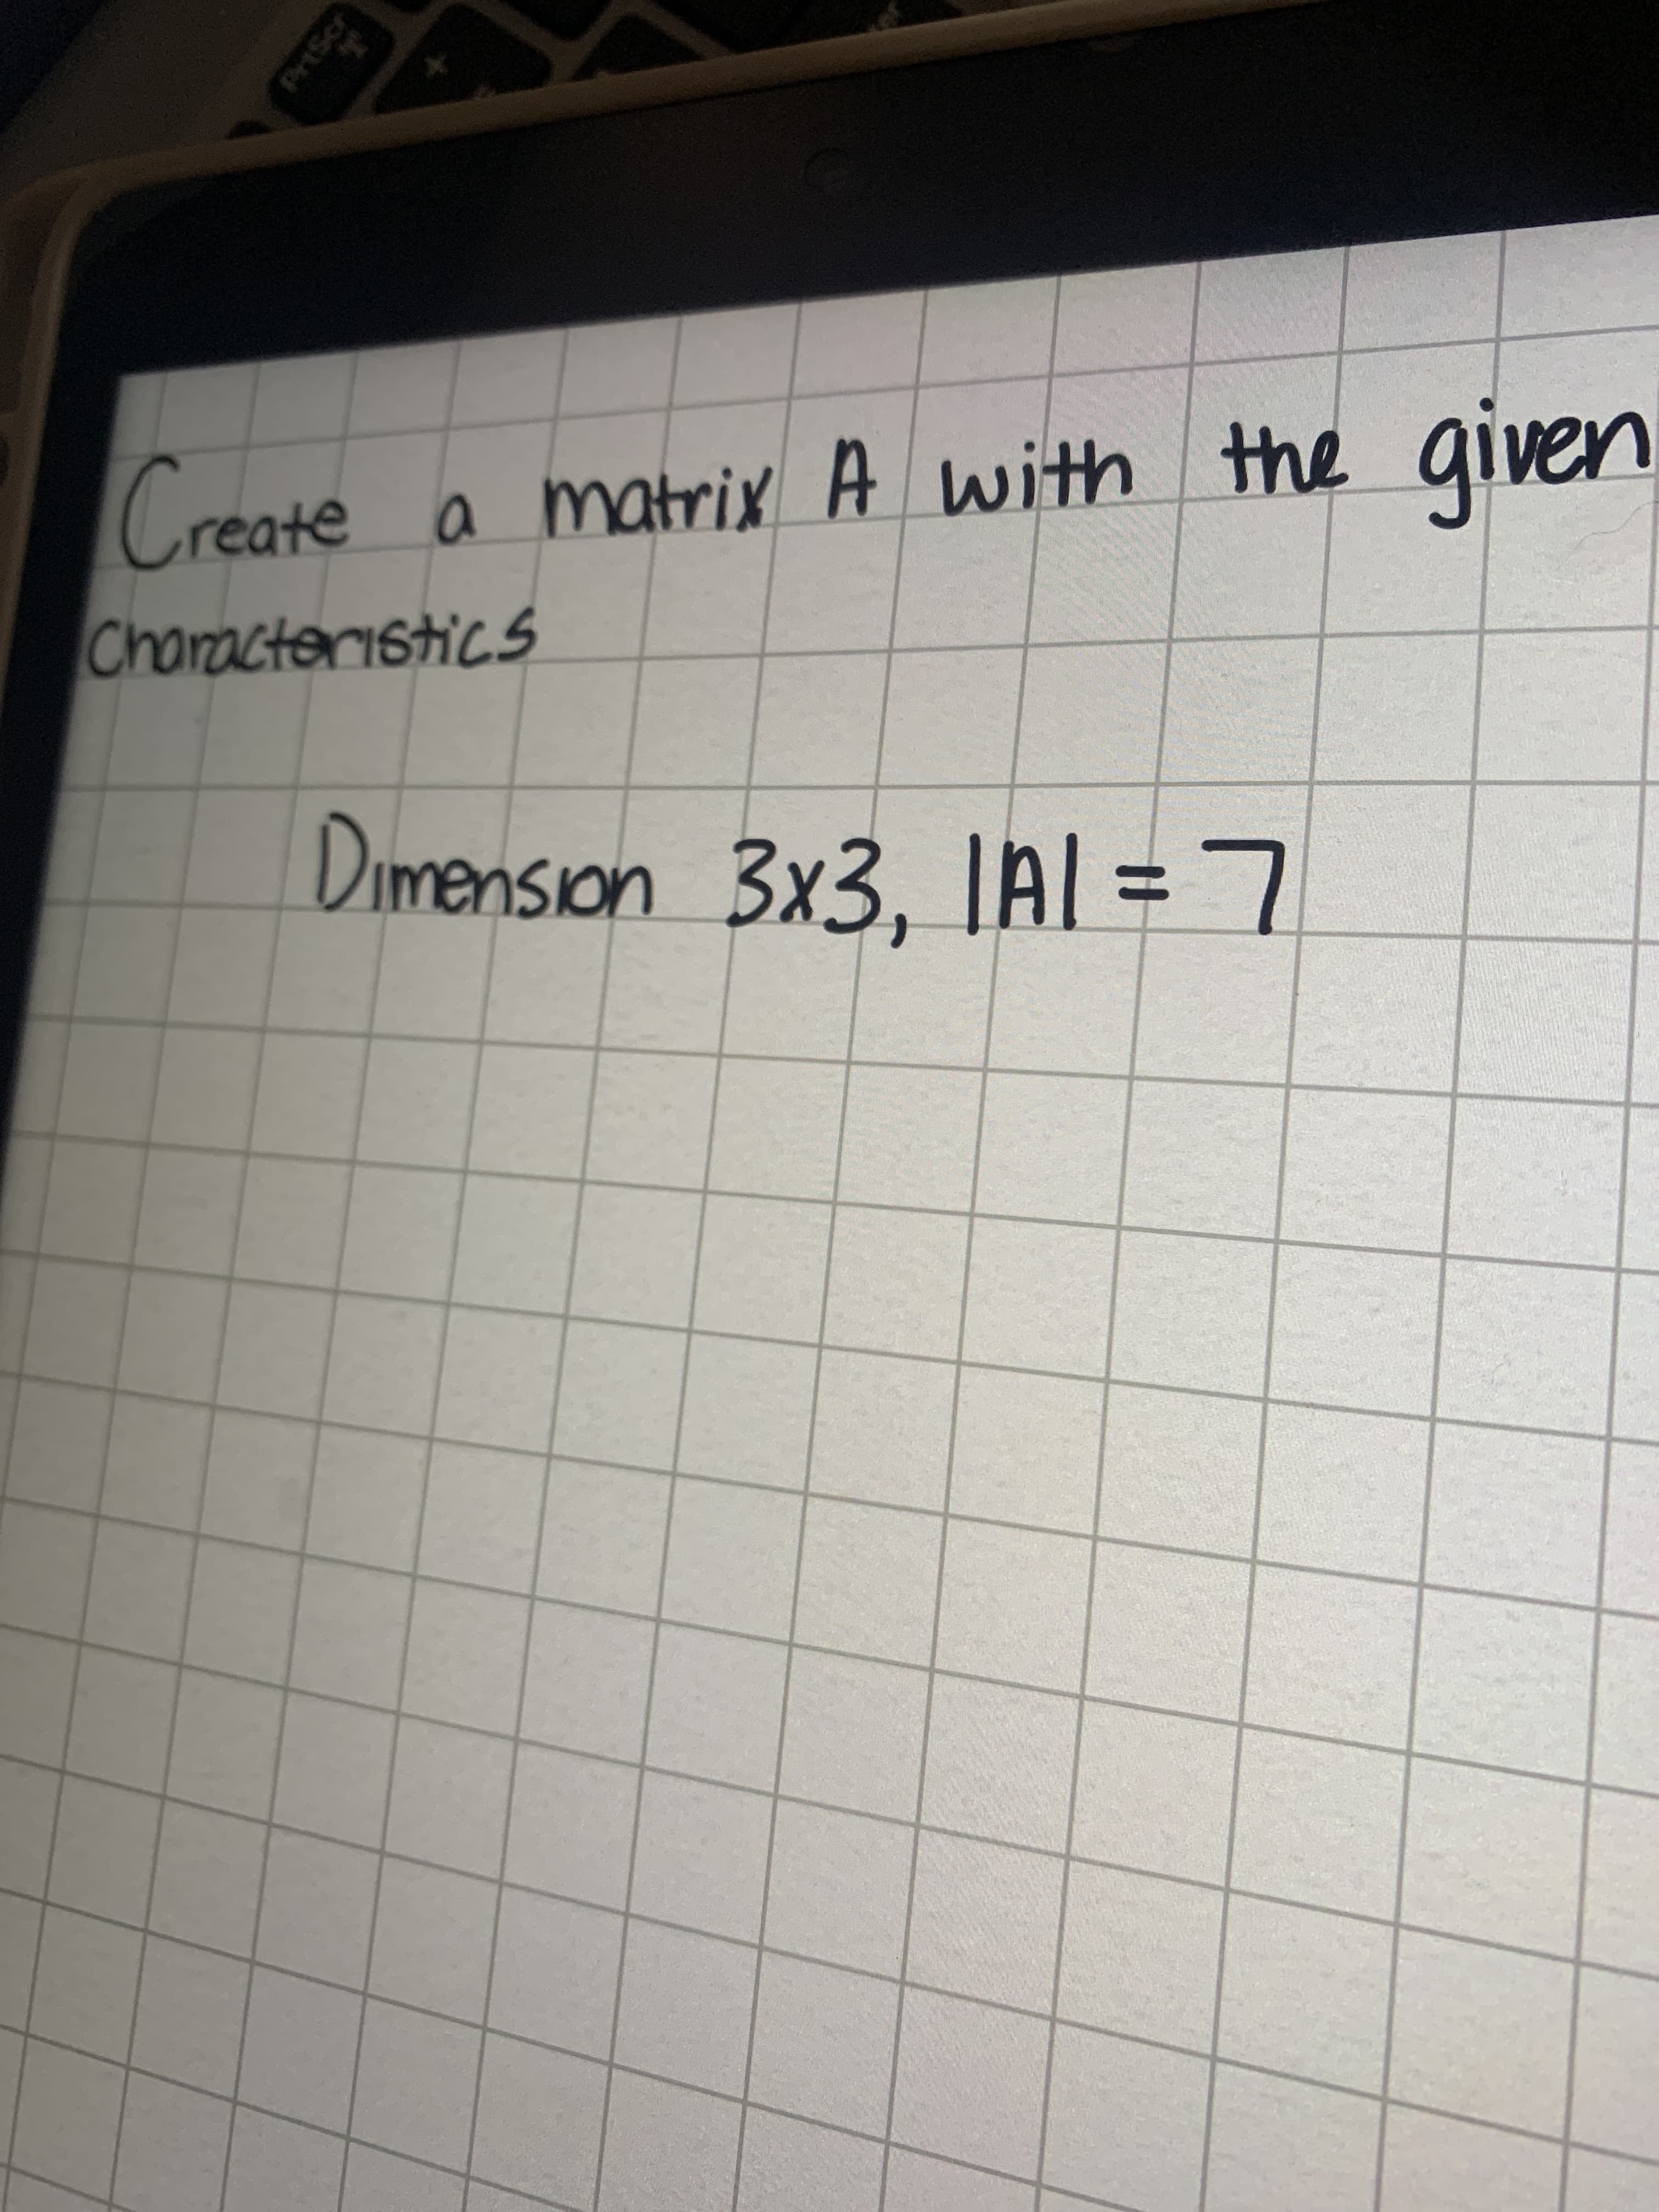 Create
a matrix A with the
given
Characteristics
Dimension 3x3, IAl = 7
%3D
